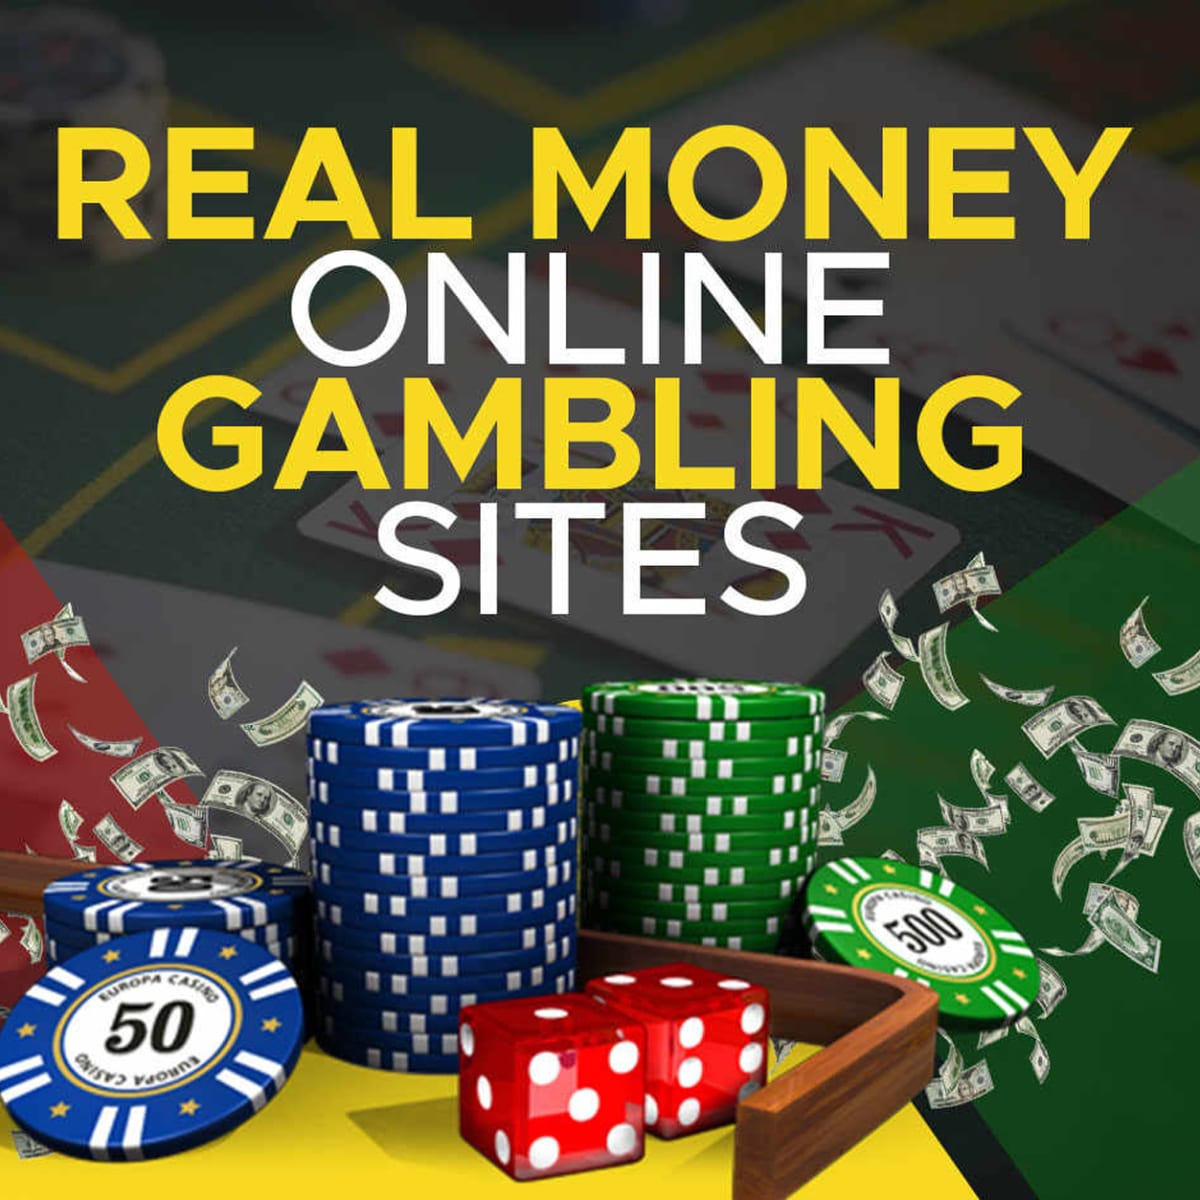 Did You Start Online Casino In Cyprus For Passion or Money?